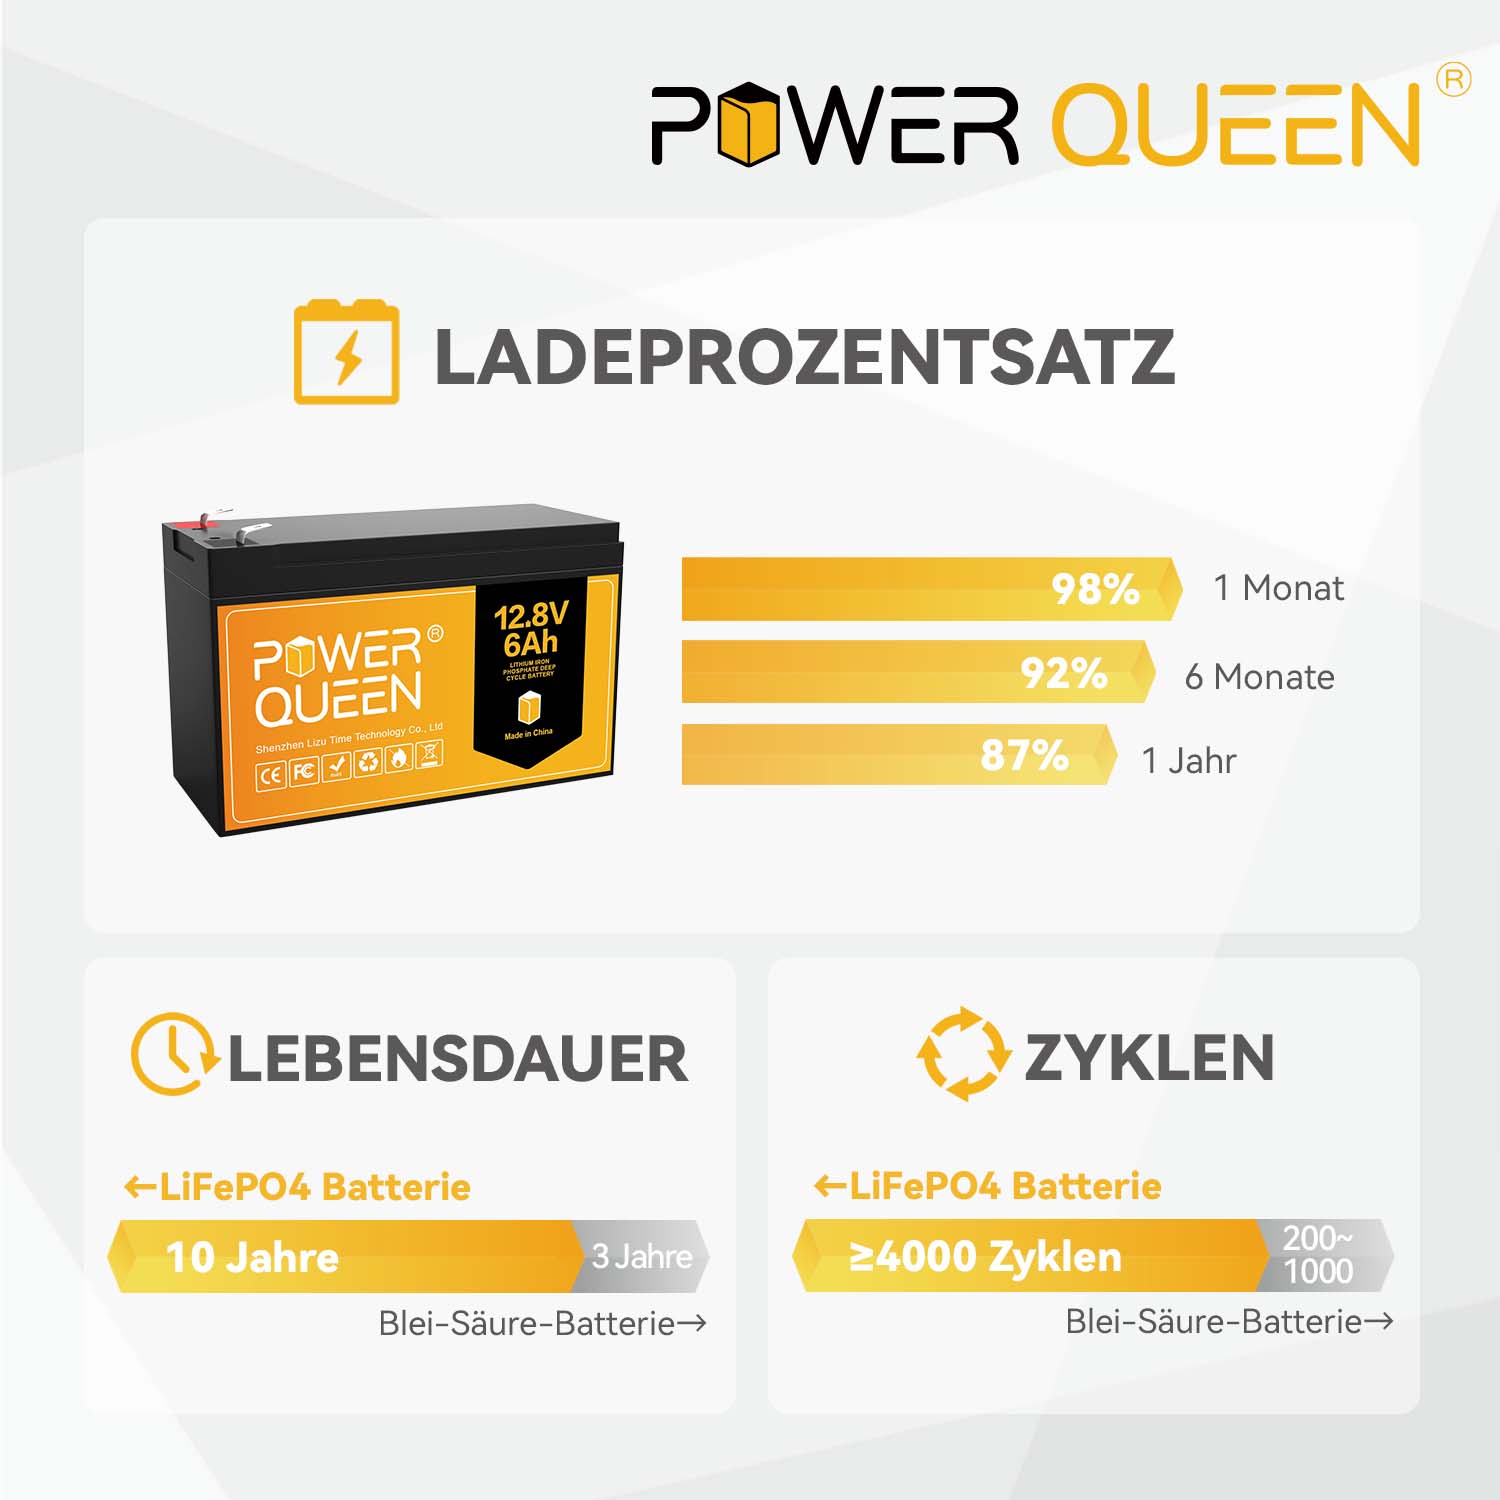 Power Queen 12.8V 6Ah lithium battery with integrated 6A BMS